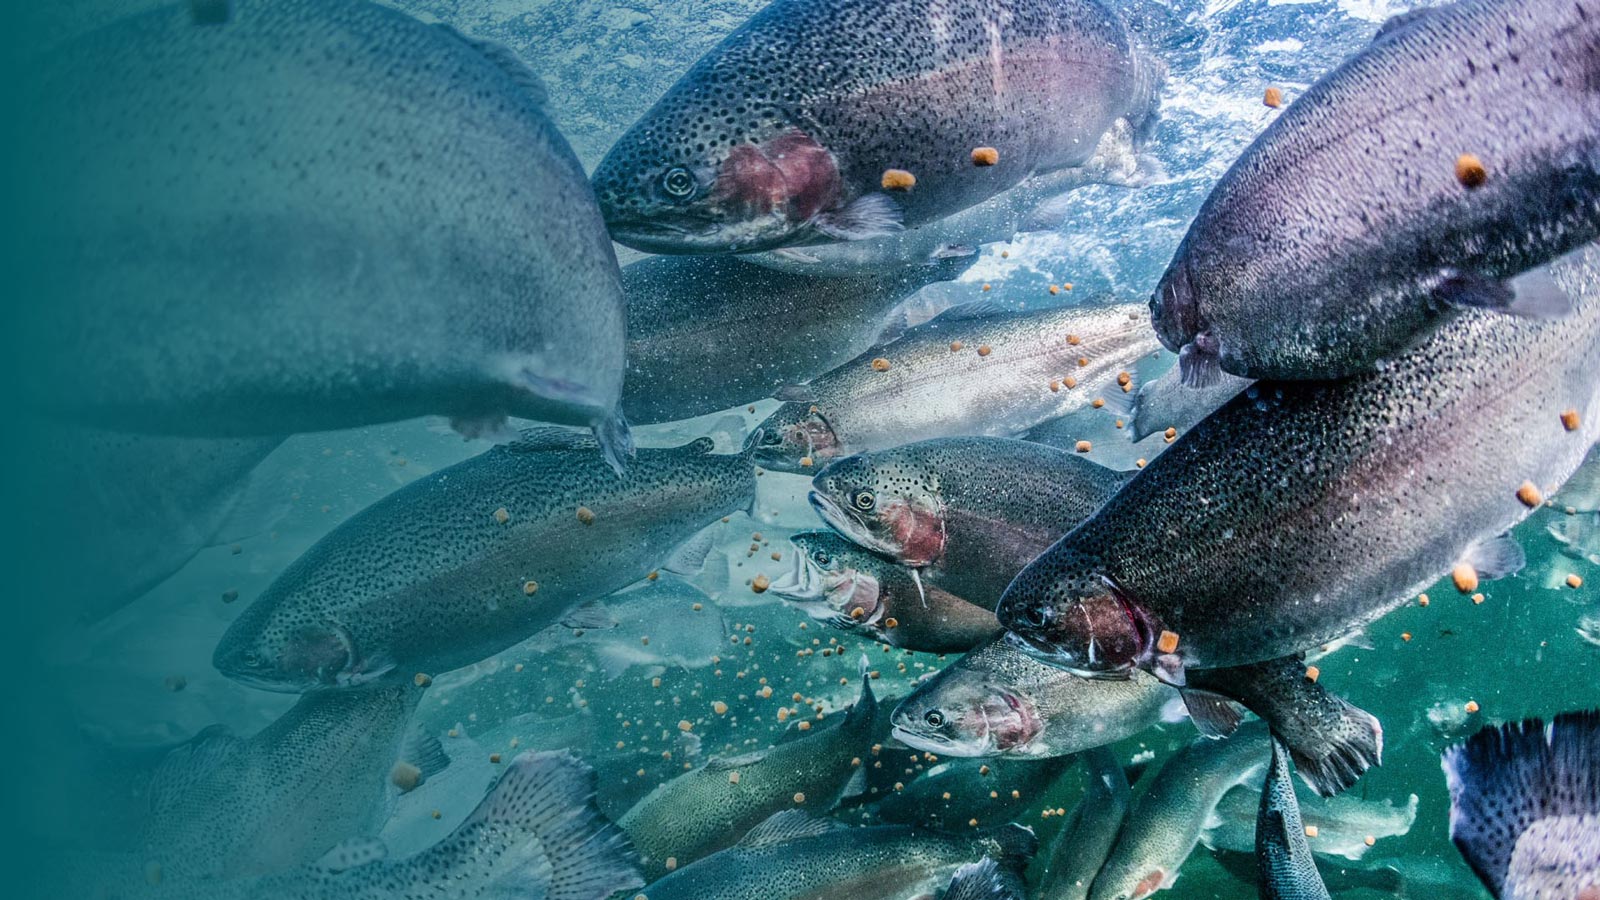 Alltech-Fennoaqua-tiedote The future of domestic fish feed production was secured with the change in ownership of Alltech Fennoaqua. Efima is supporting the company in its financial management transition.  (Picture: Alltech Fennoaqua)